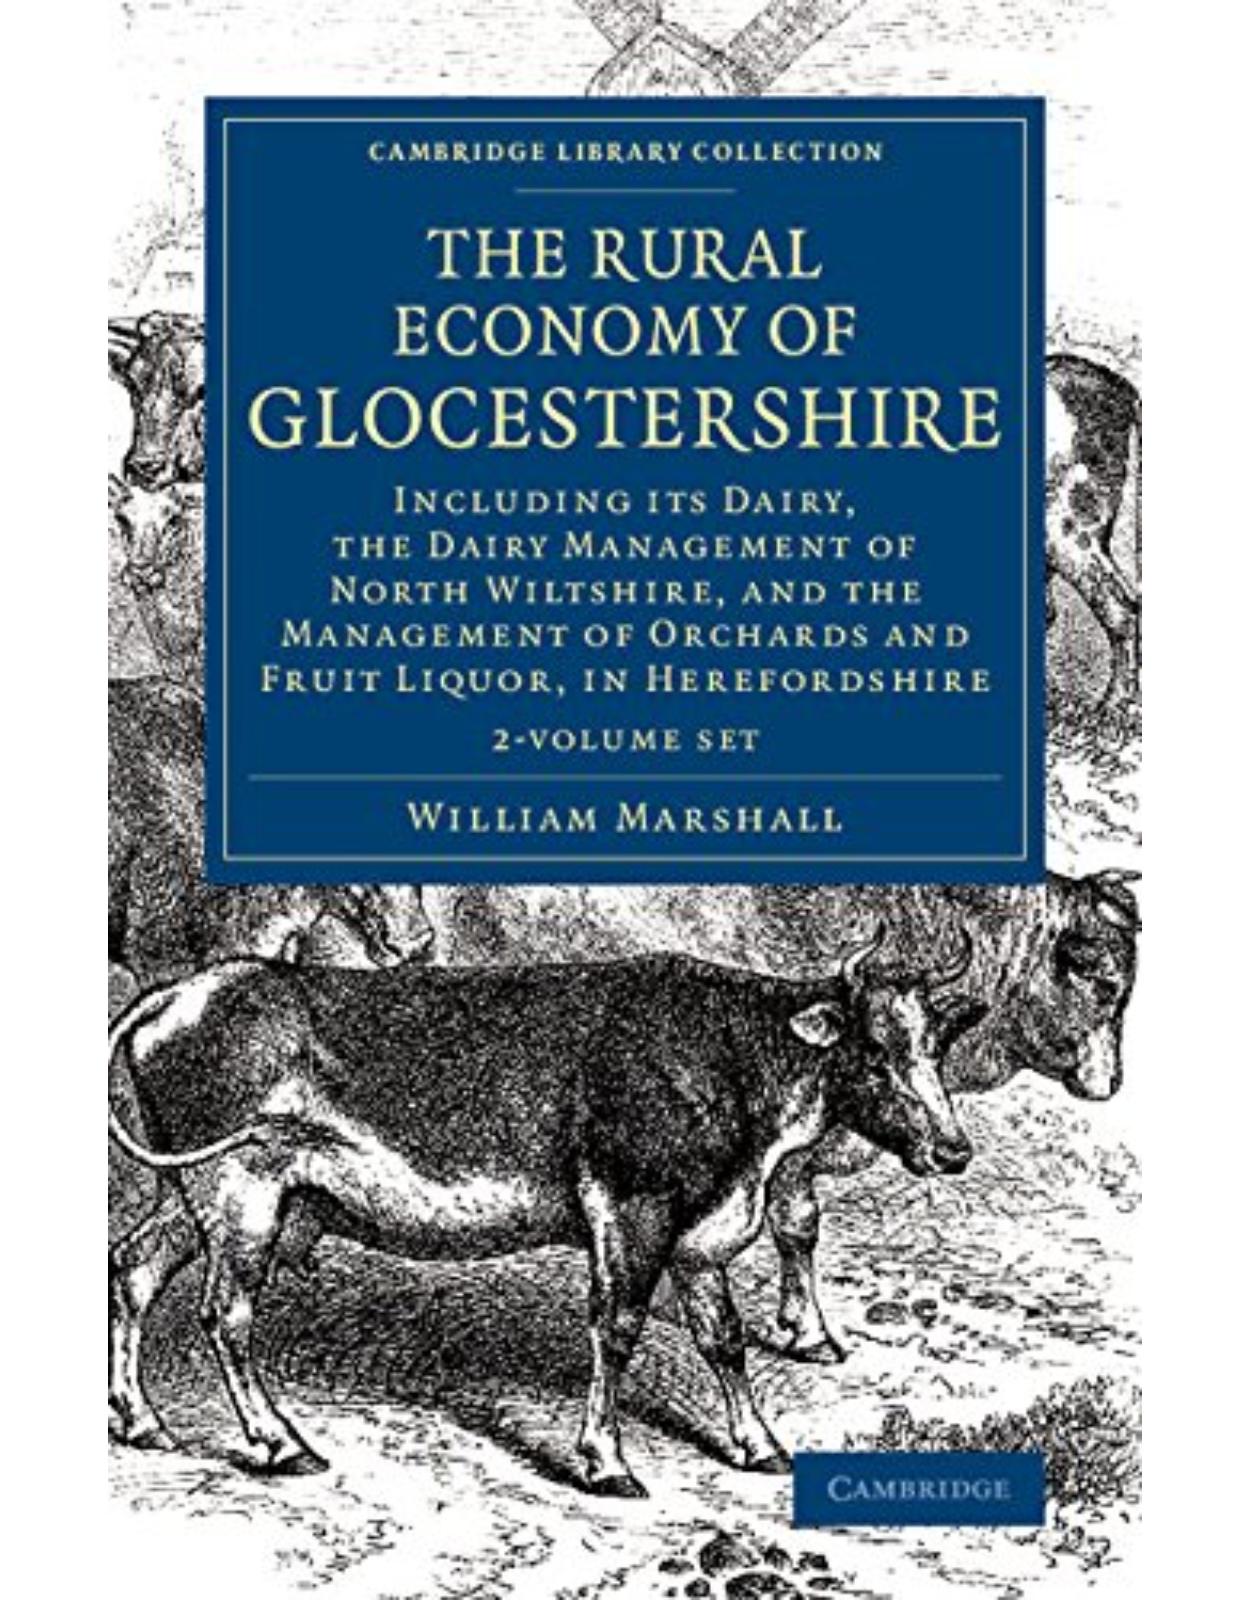 The Rural Economy of Glocestershire: Including its Dairy, Together with the Dairy Management of North Wiltshire, and the Management of Orchards and Fruit Liquor, in Herefordshire ( 2-Volume Set)